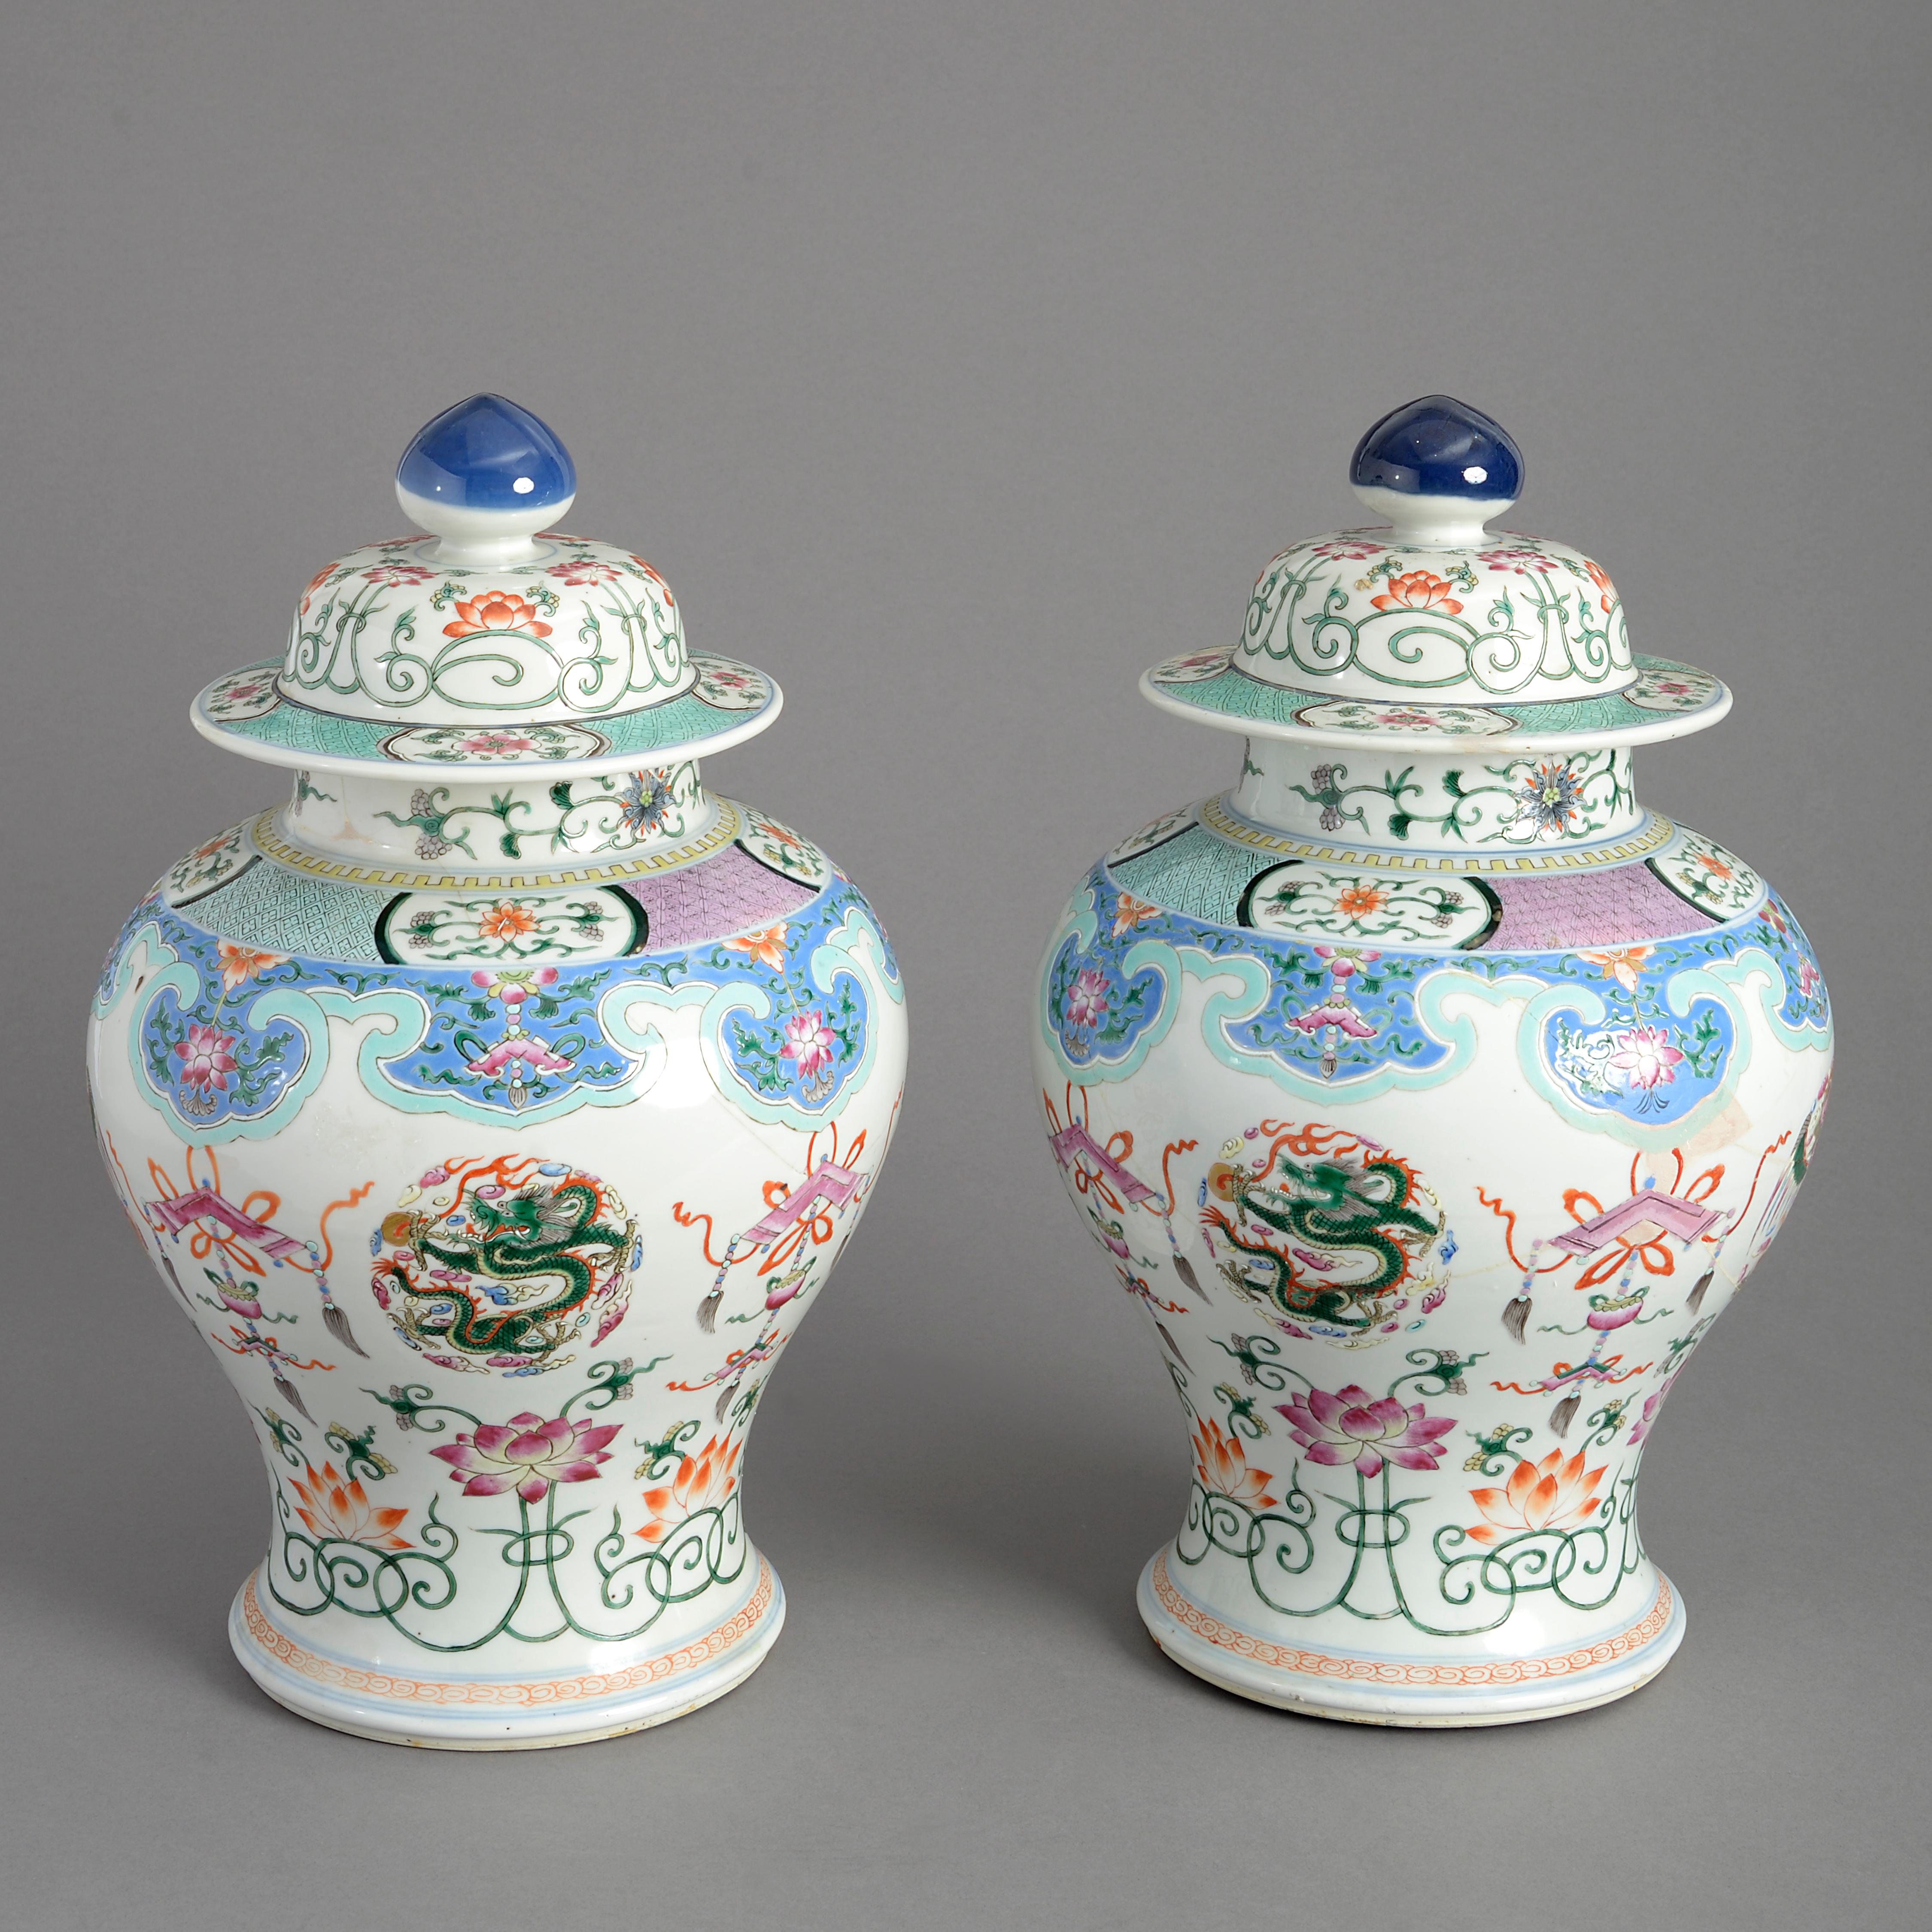 Chinese Export Pair of 19th Century Famille Rose Porcelain Vases and Covers